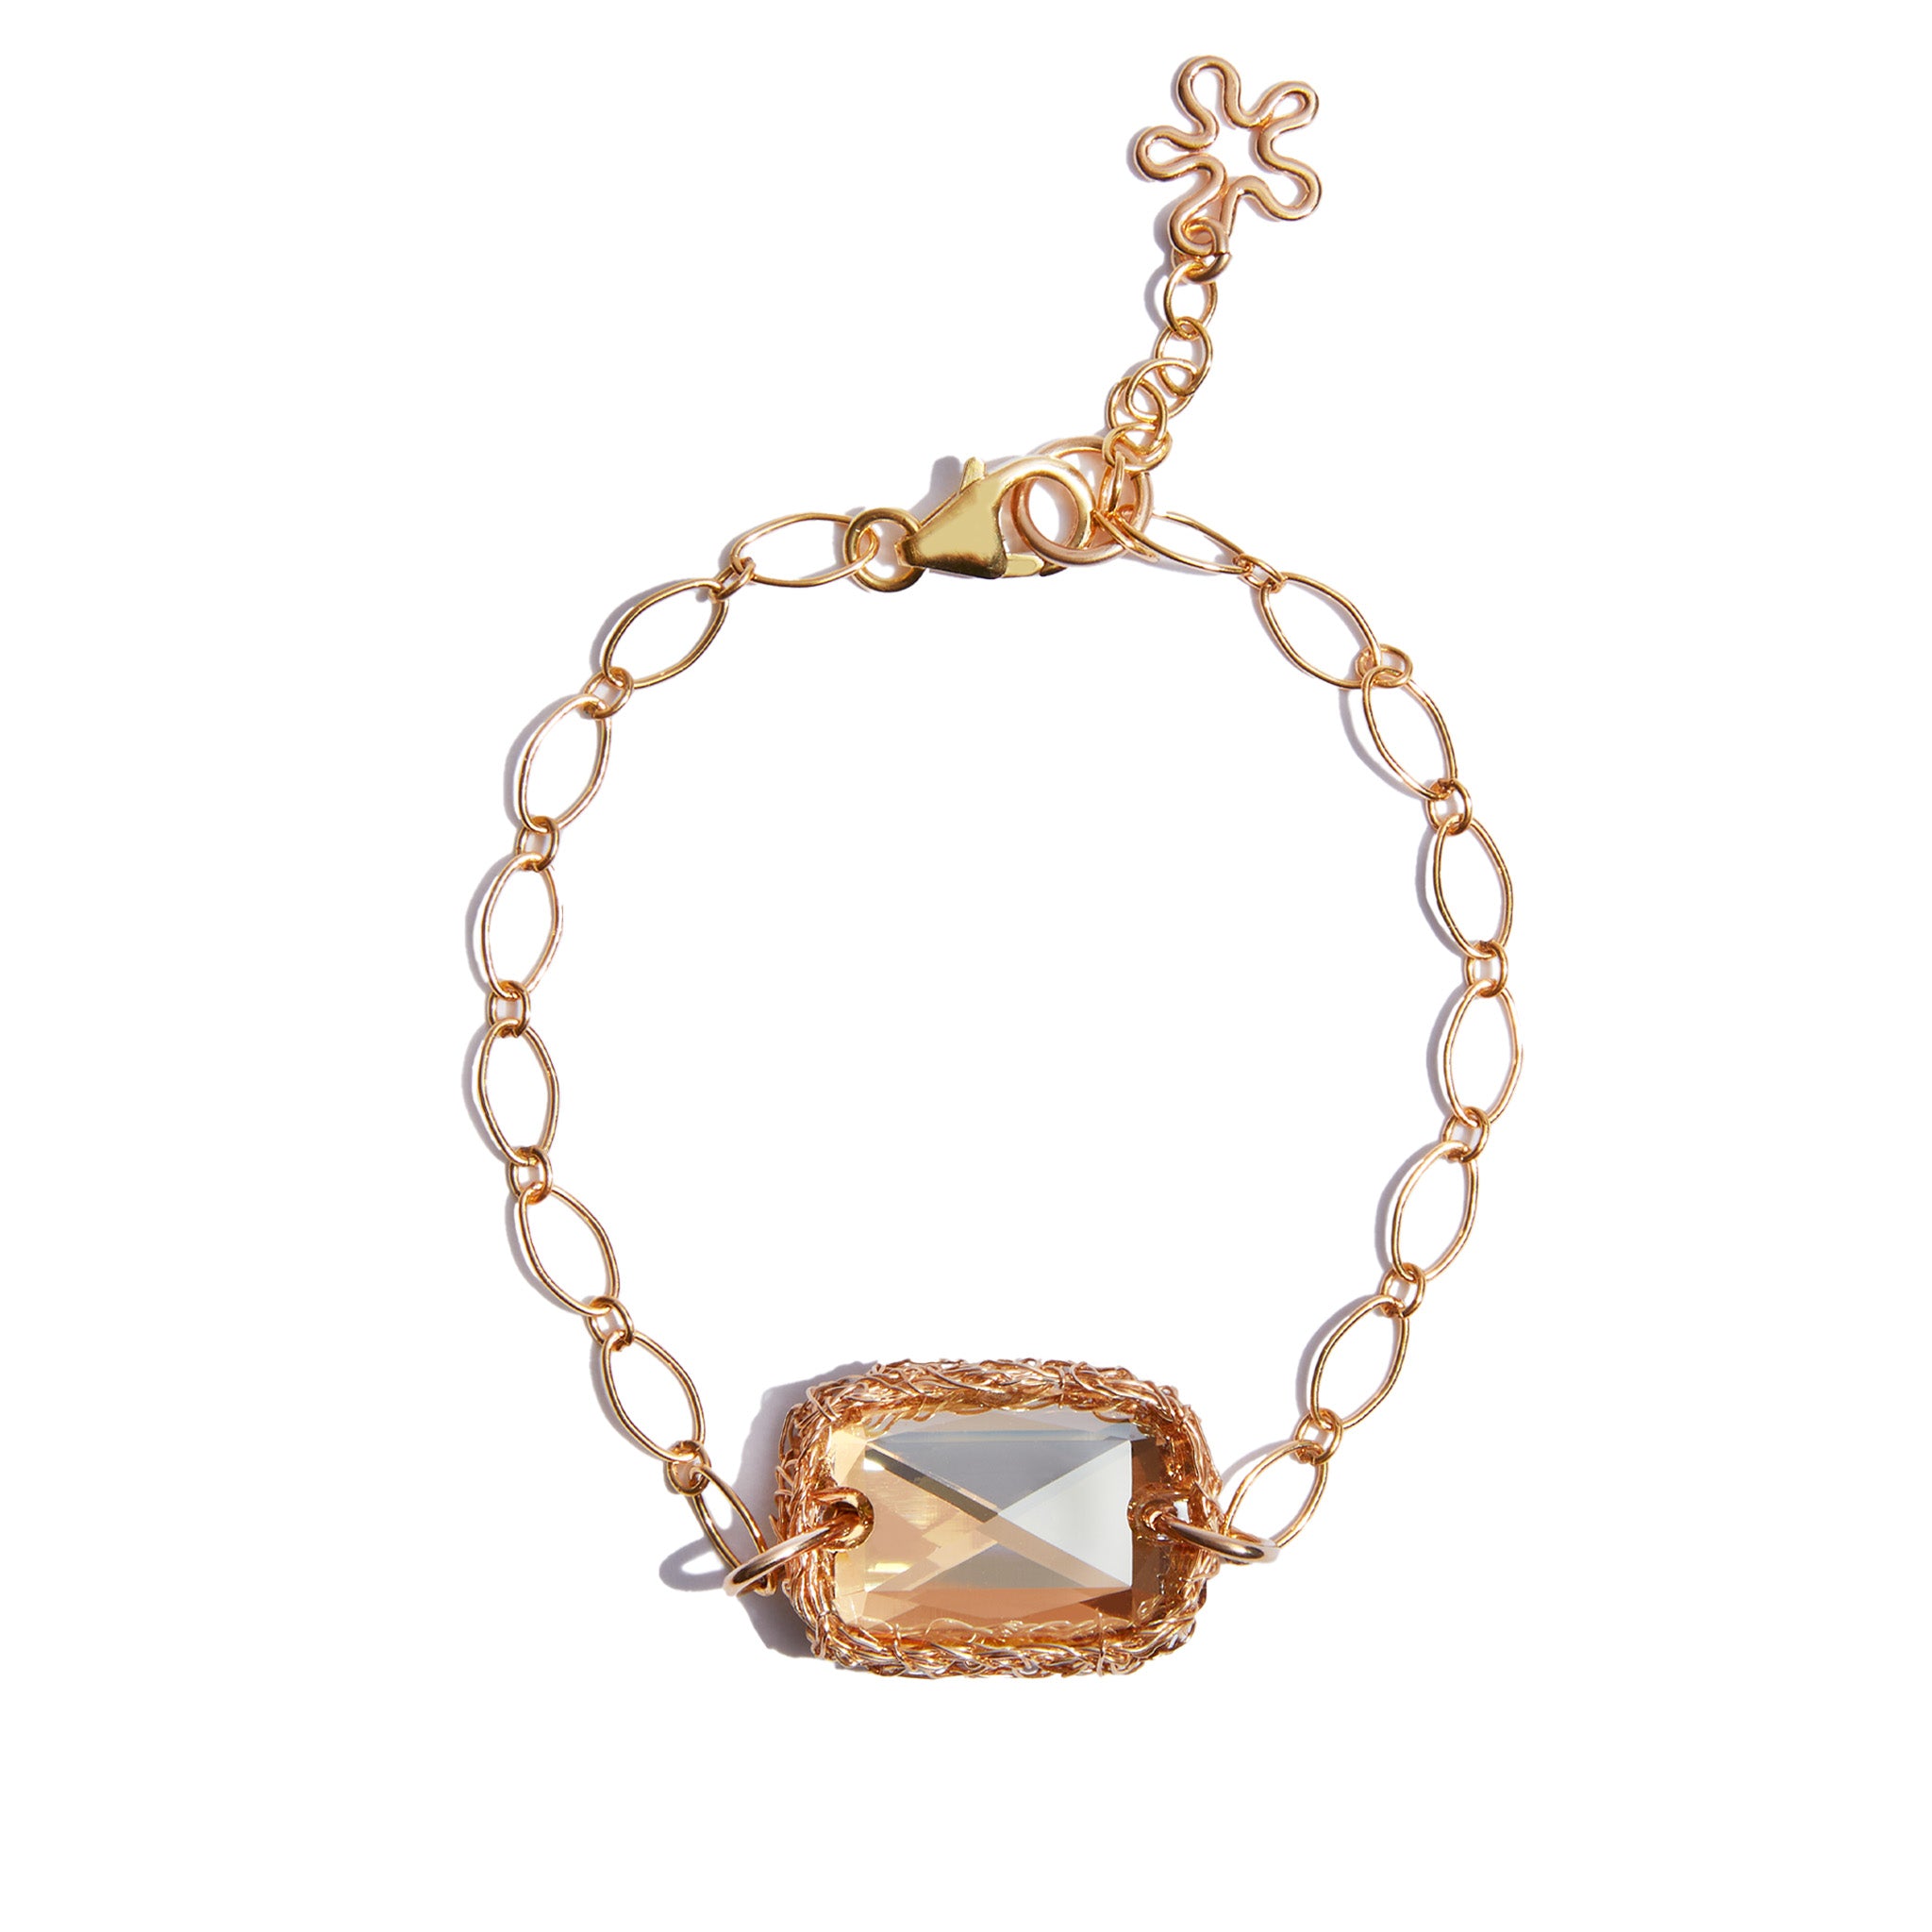 Our Champagne crochet bracelet is made from 14ct gold fill. The perfect gift for someone special.